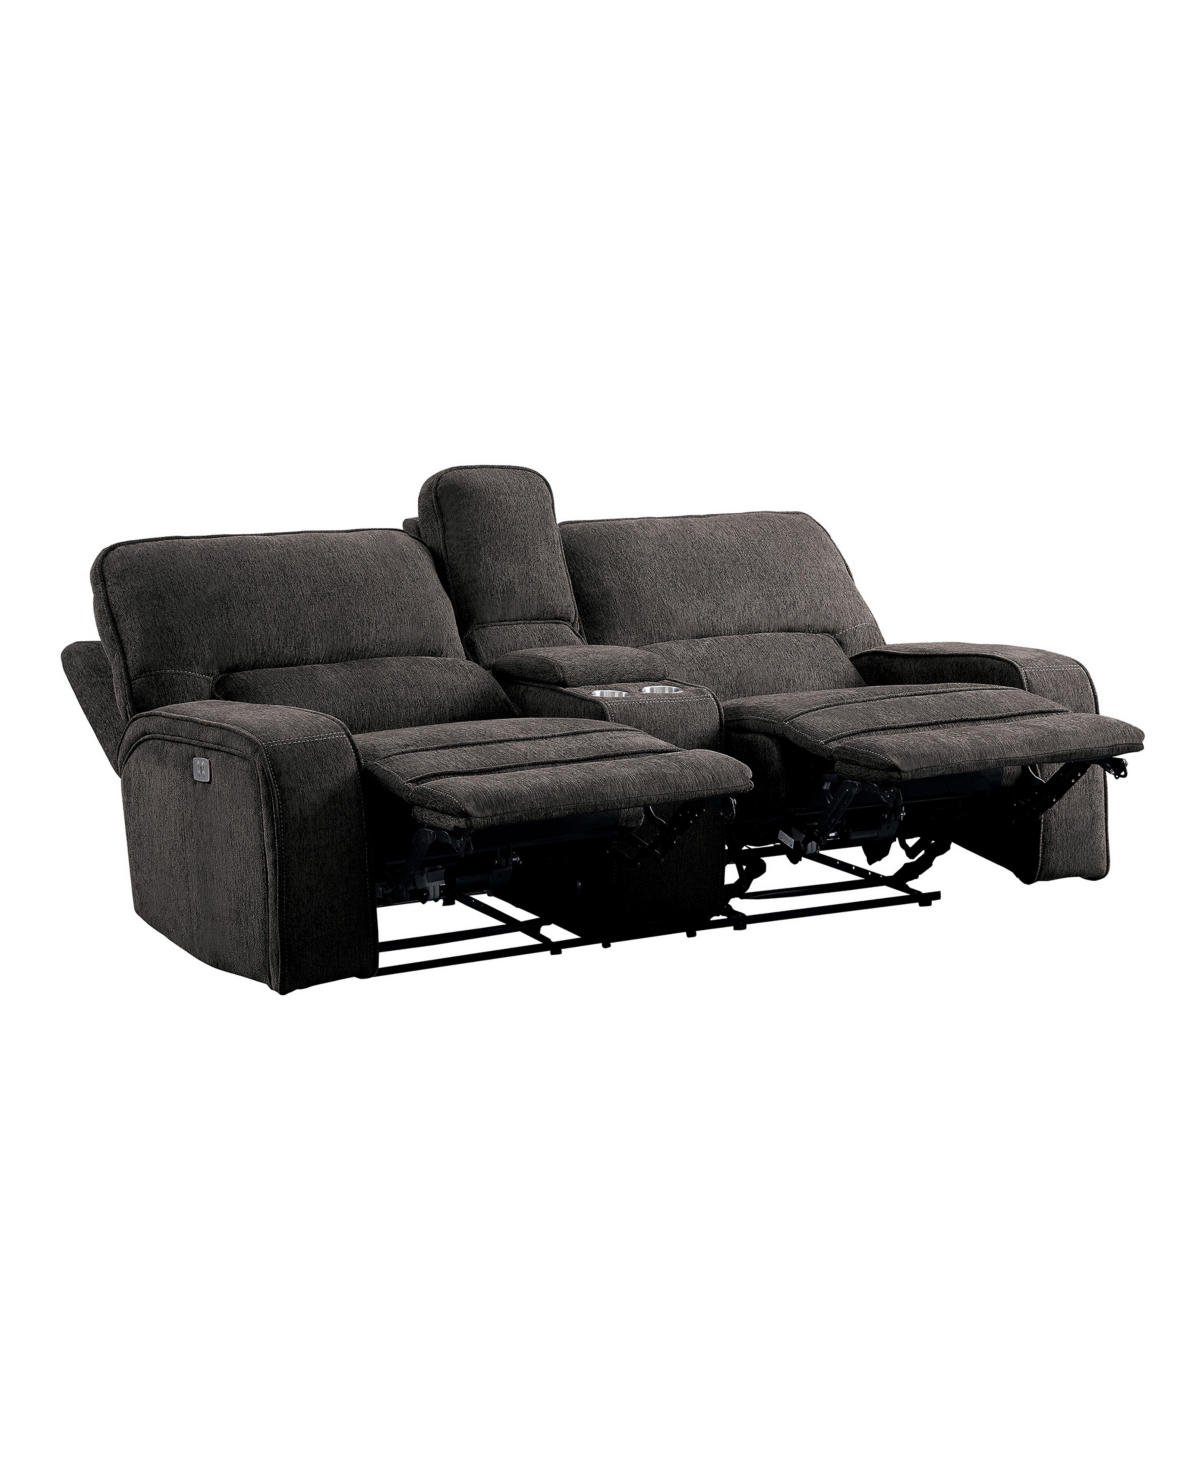 Elevated Power Recliner Loveseat